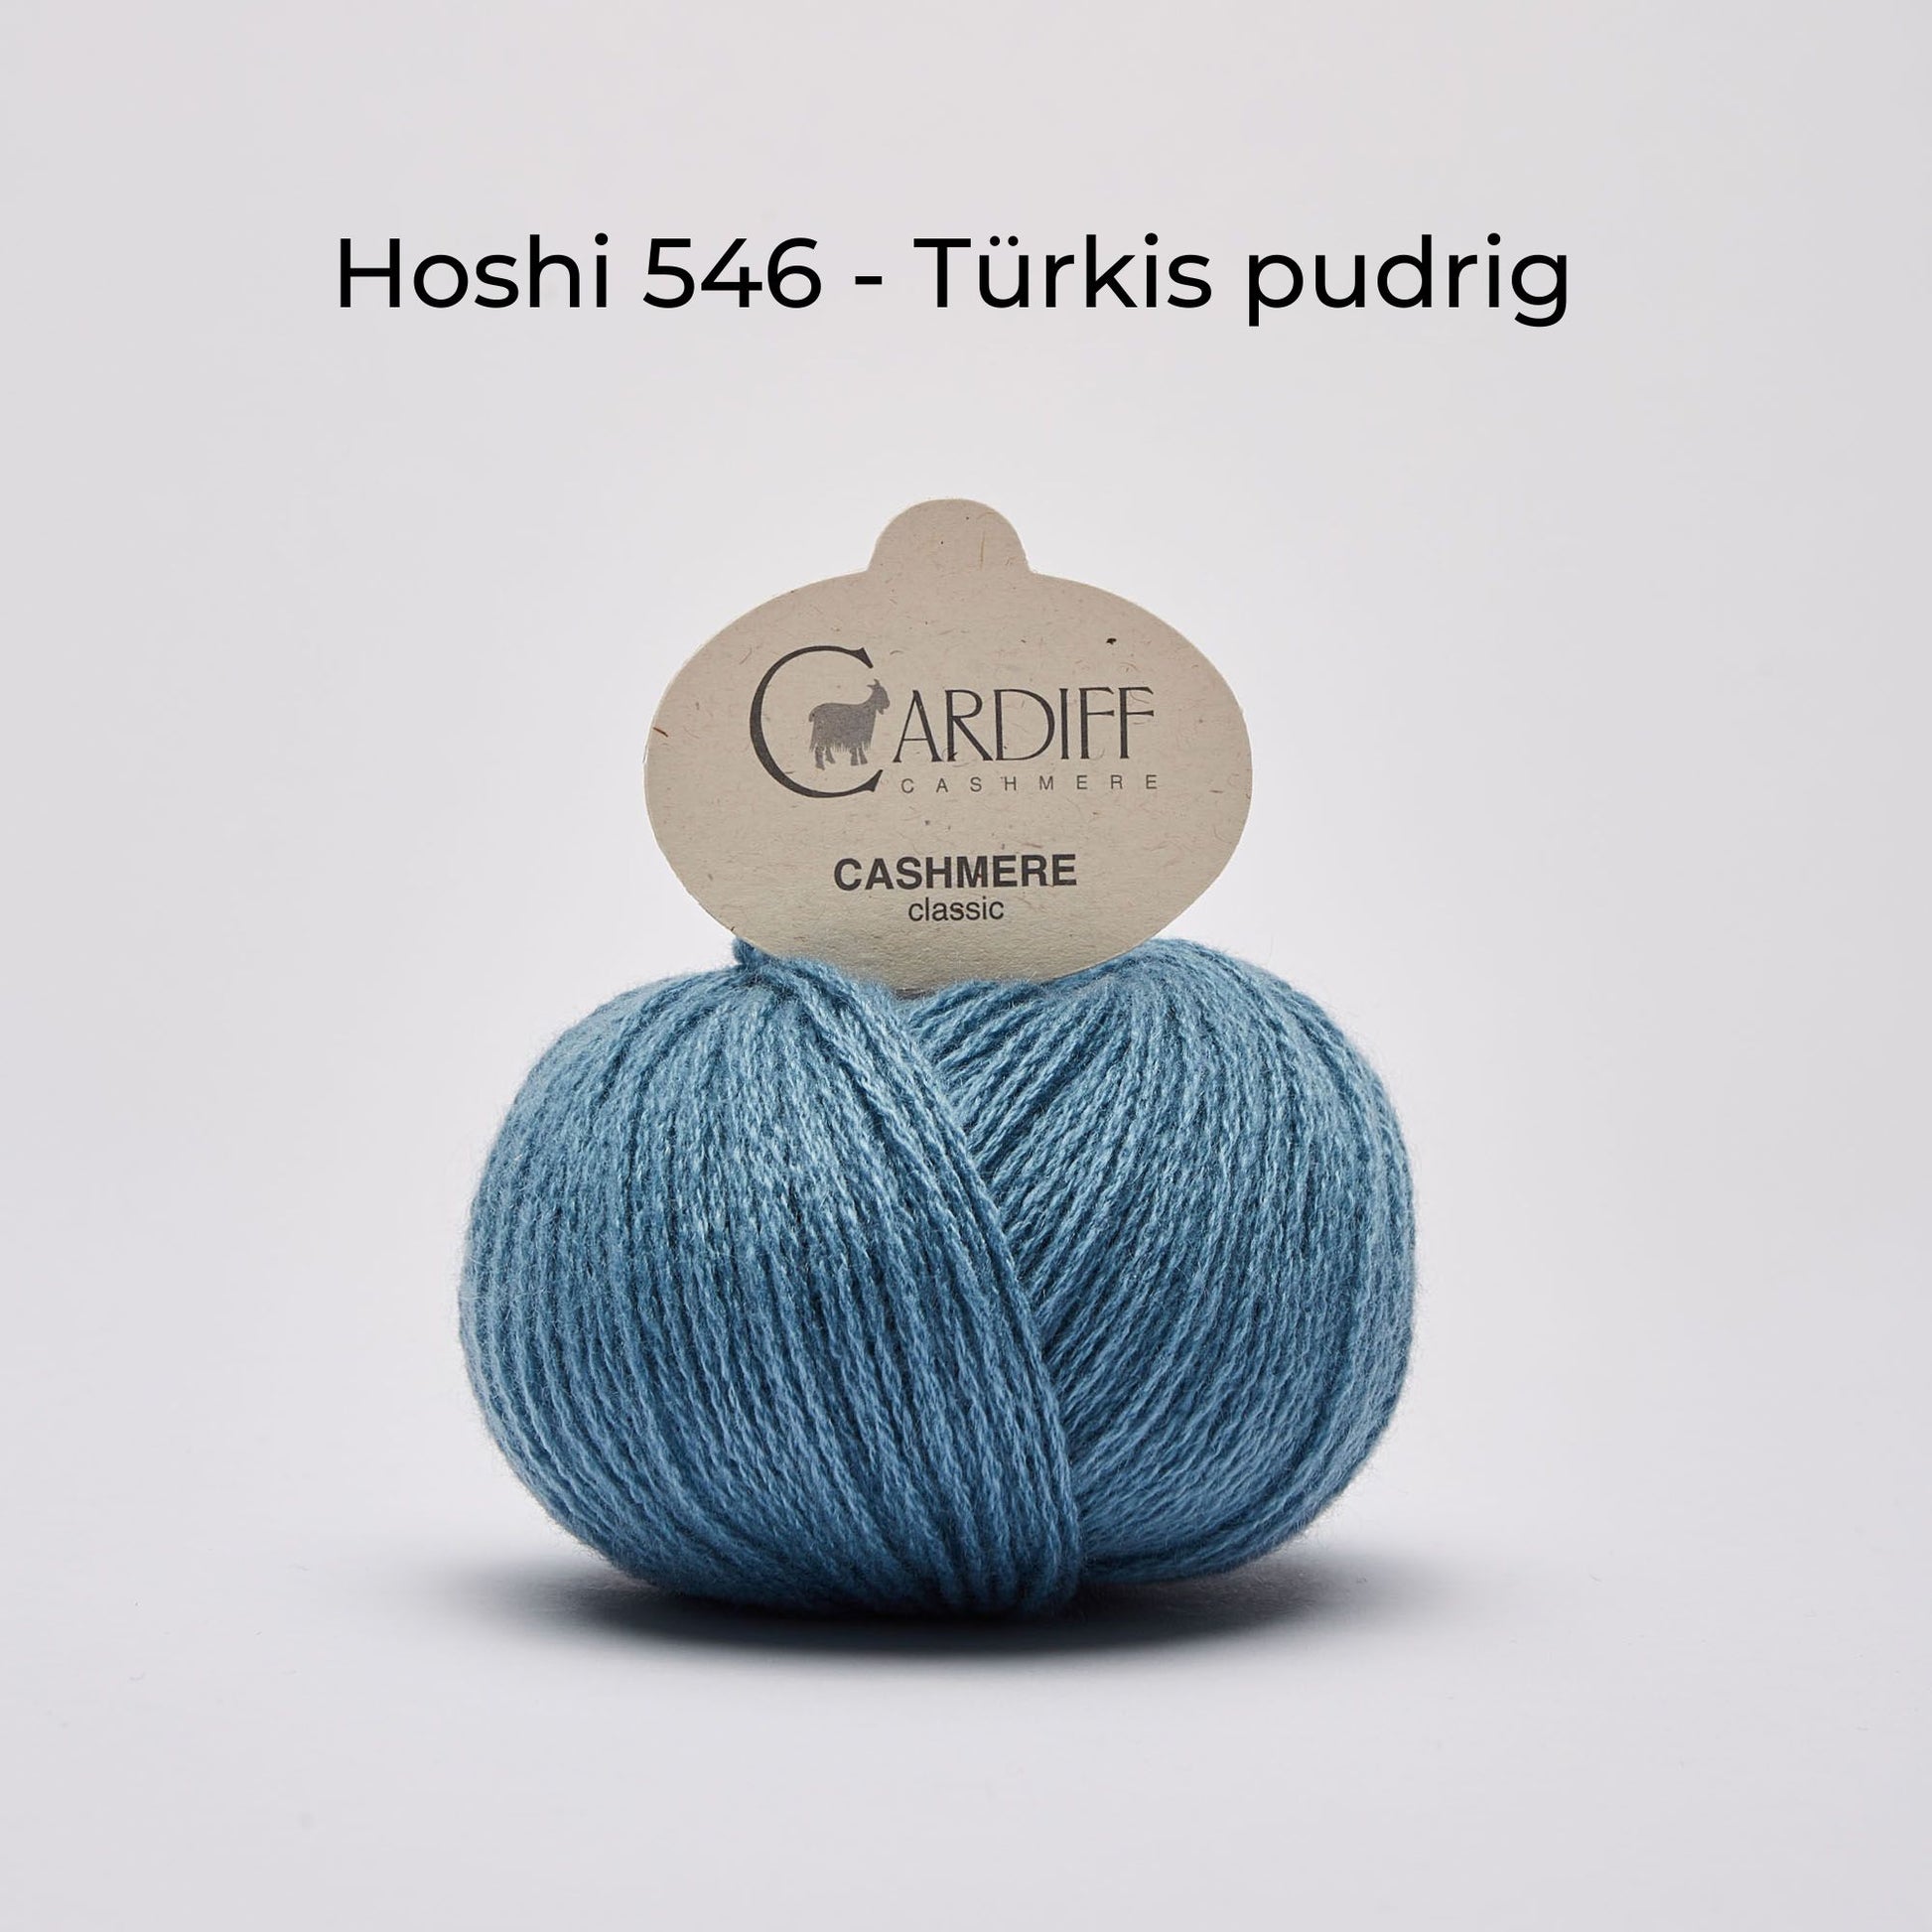 Wollknäuel, Cardiff Cashmere Classic, Farbe Hoshi 546, pudriges Türkis